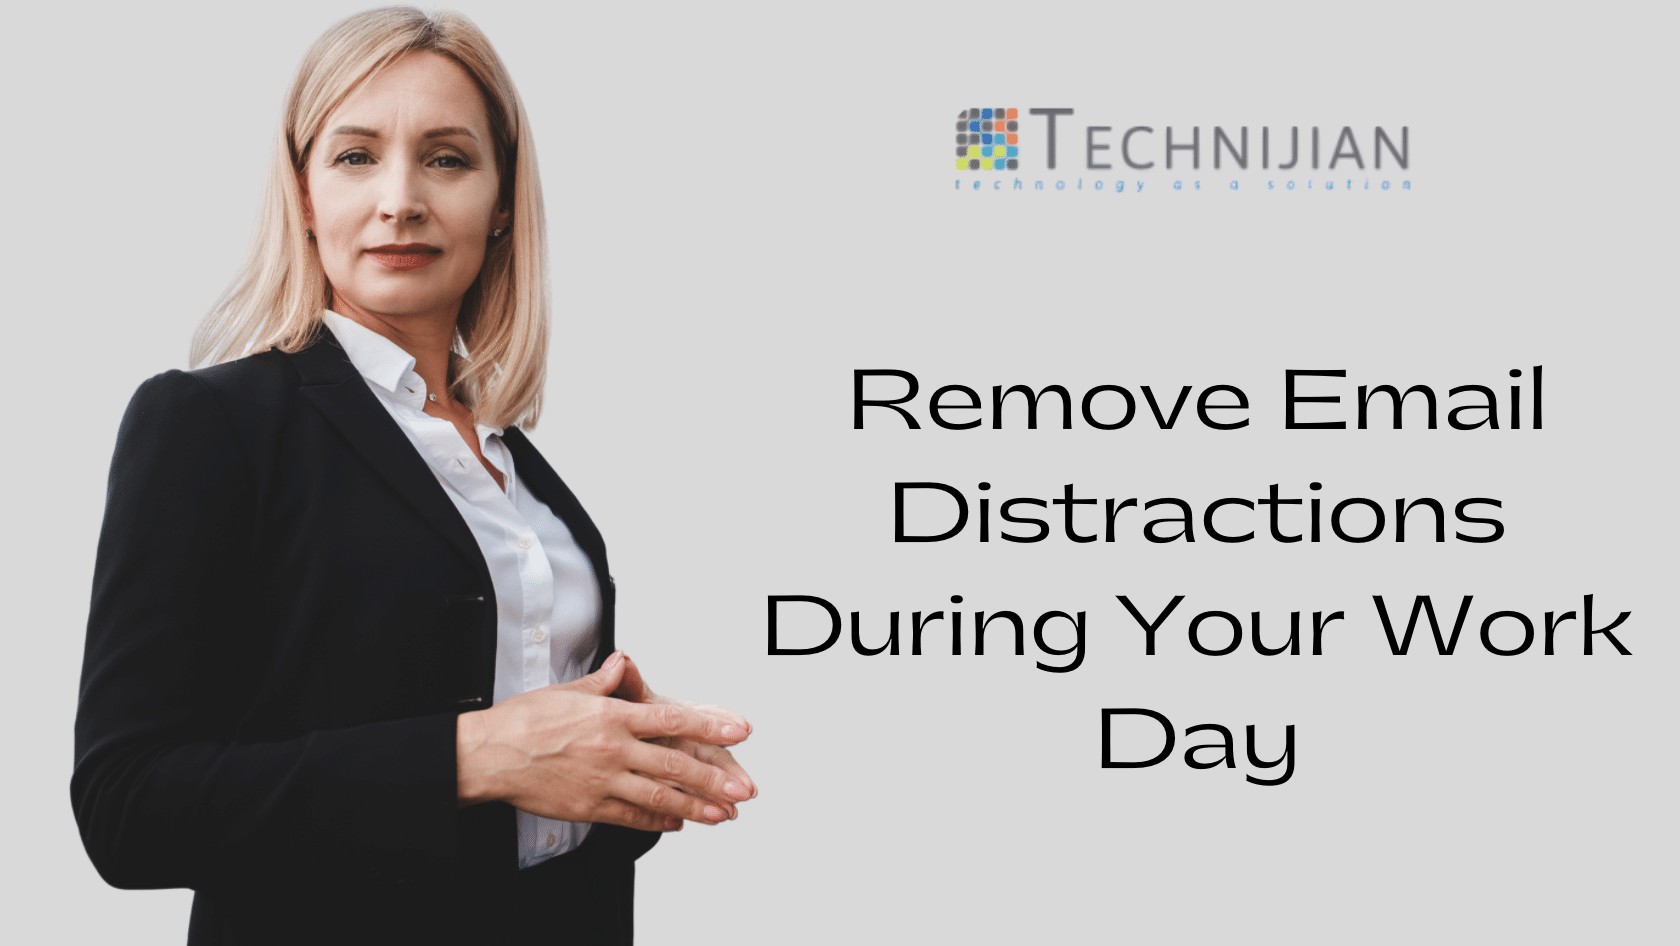 Remove Email Distractions During Your Work Day